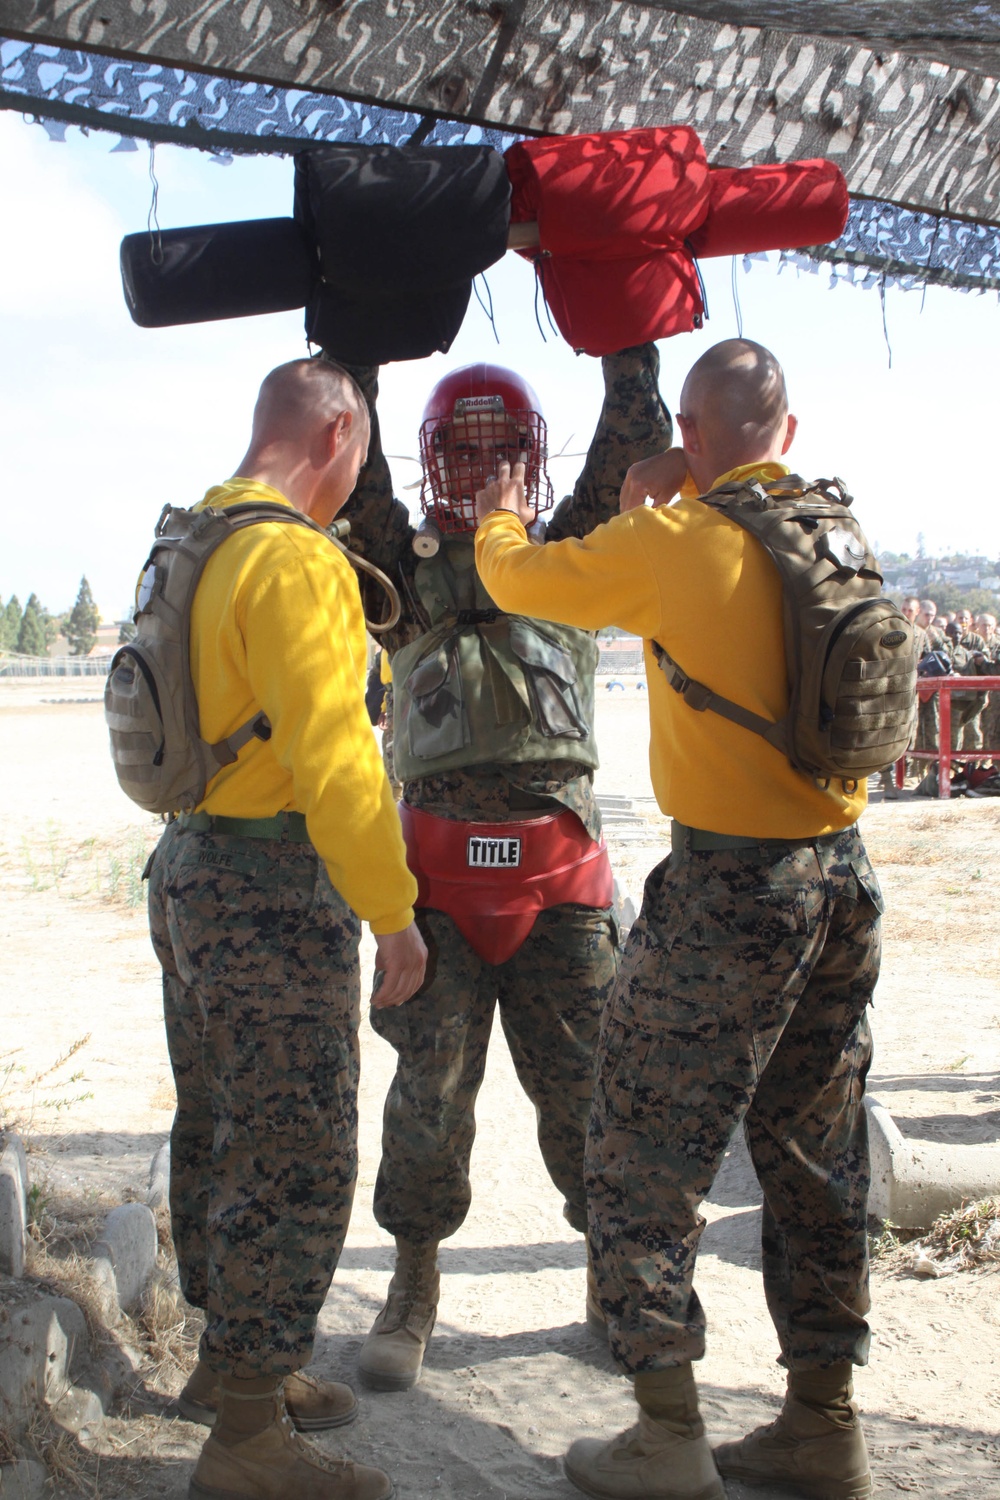 Company H goes hand-to-hand during pugil sticks three training event